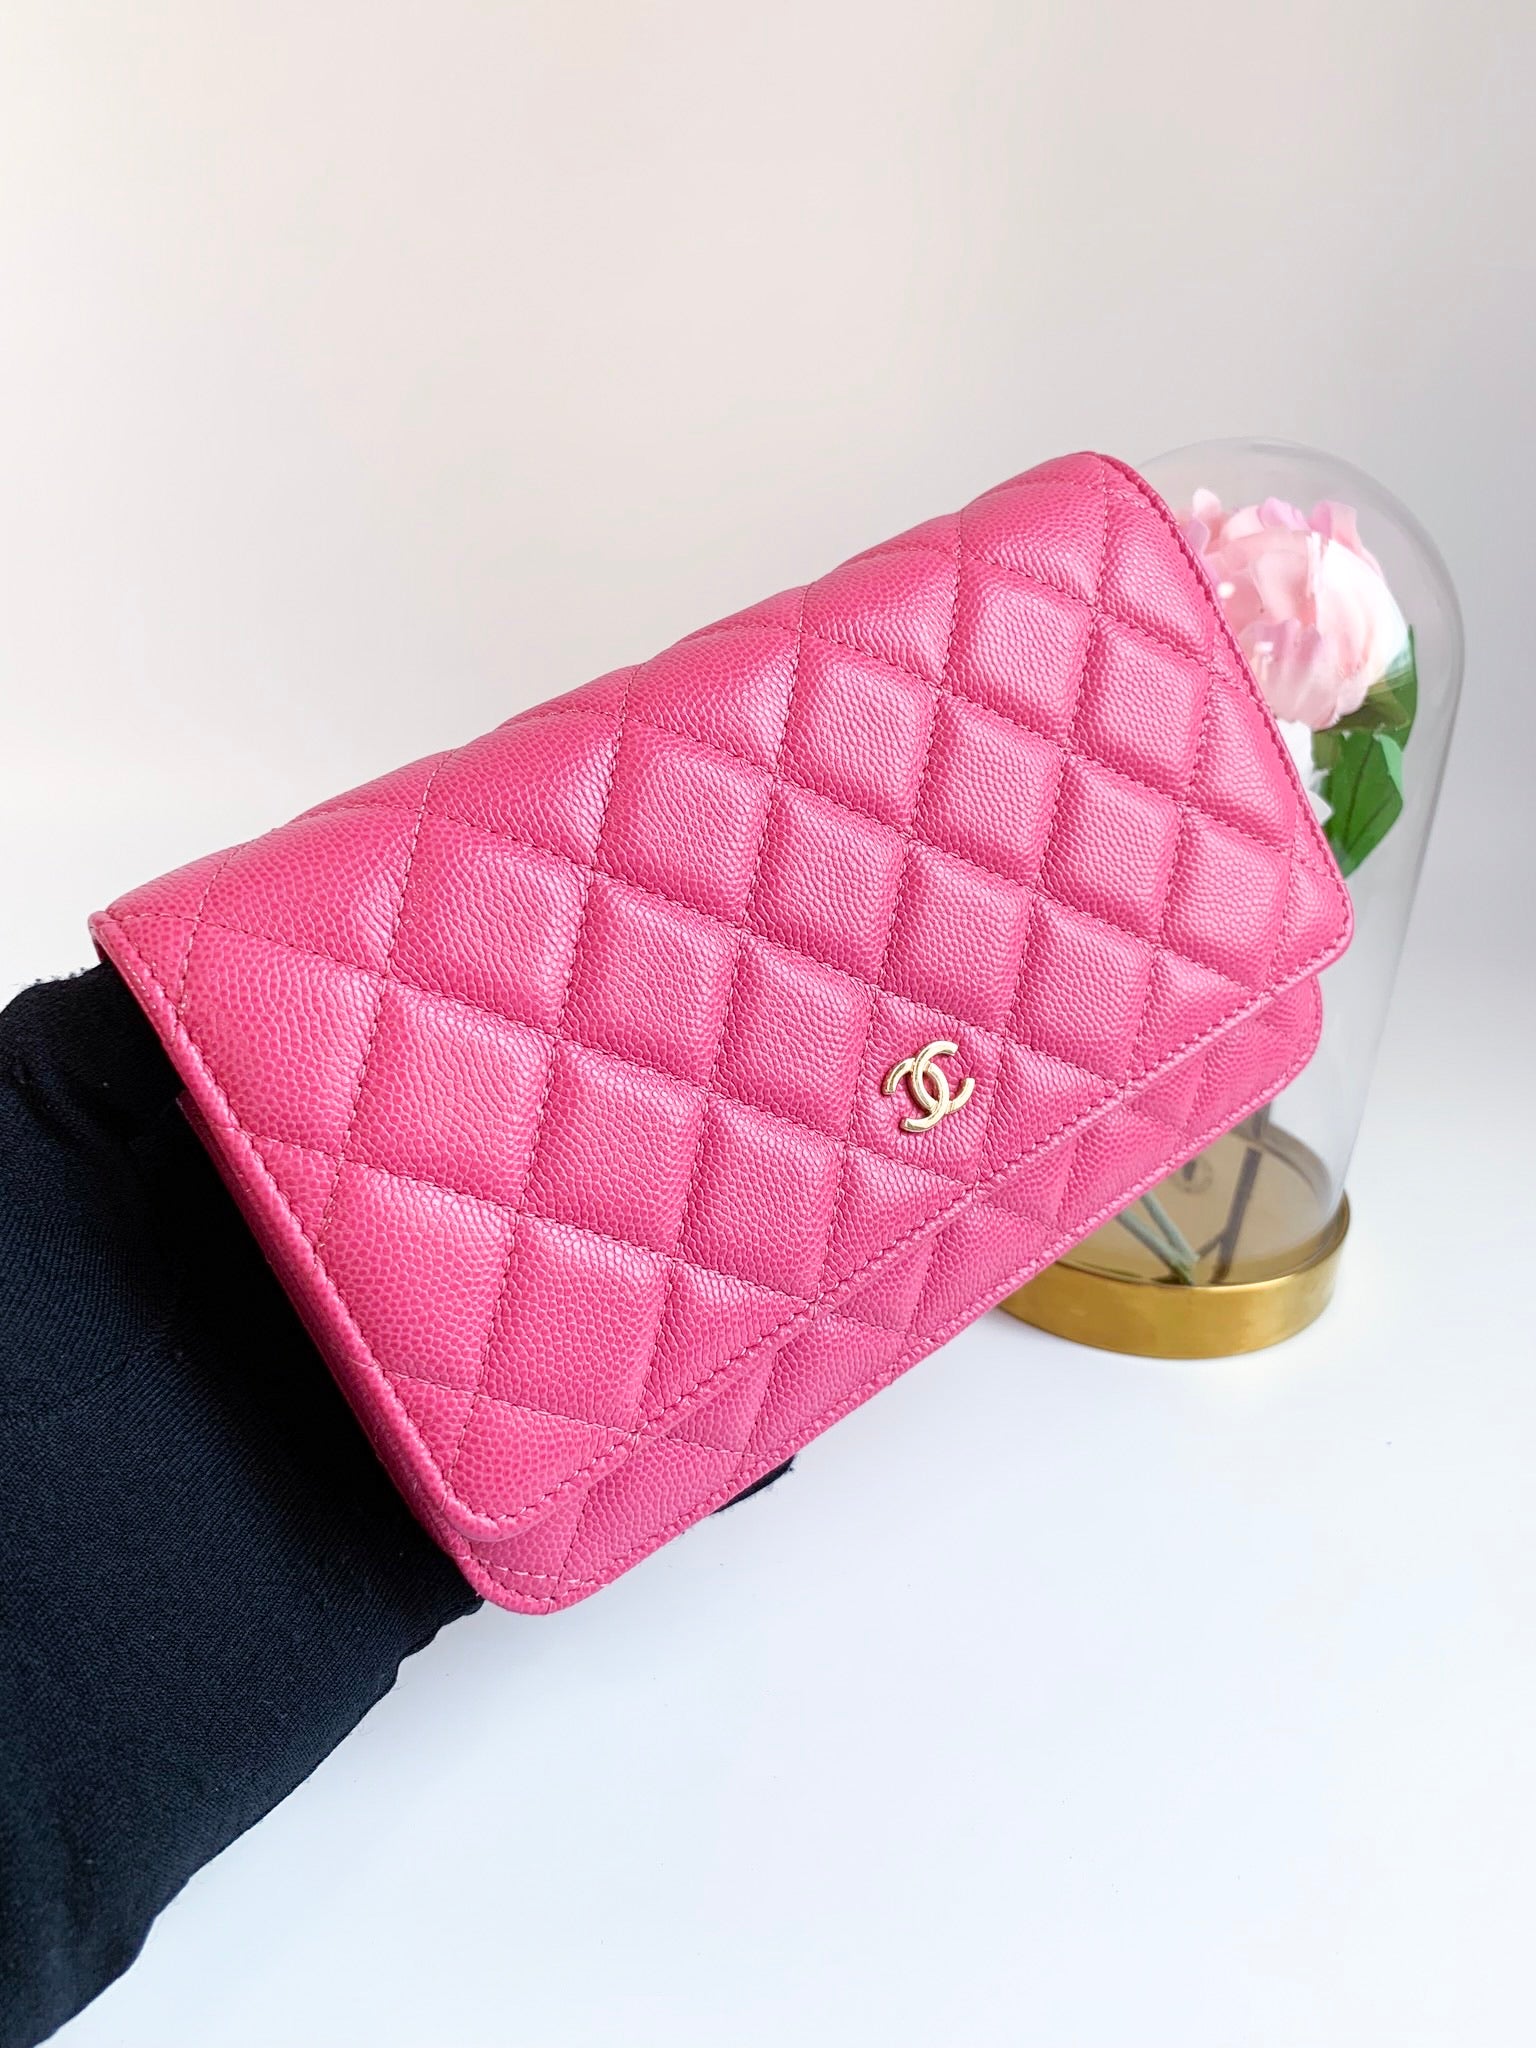 Chanel Classic Pink Caviar leather WOC